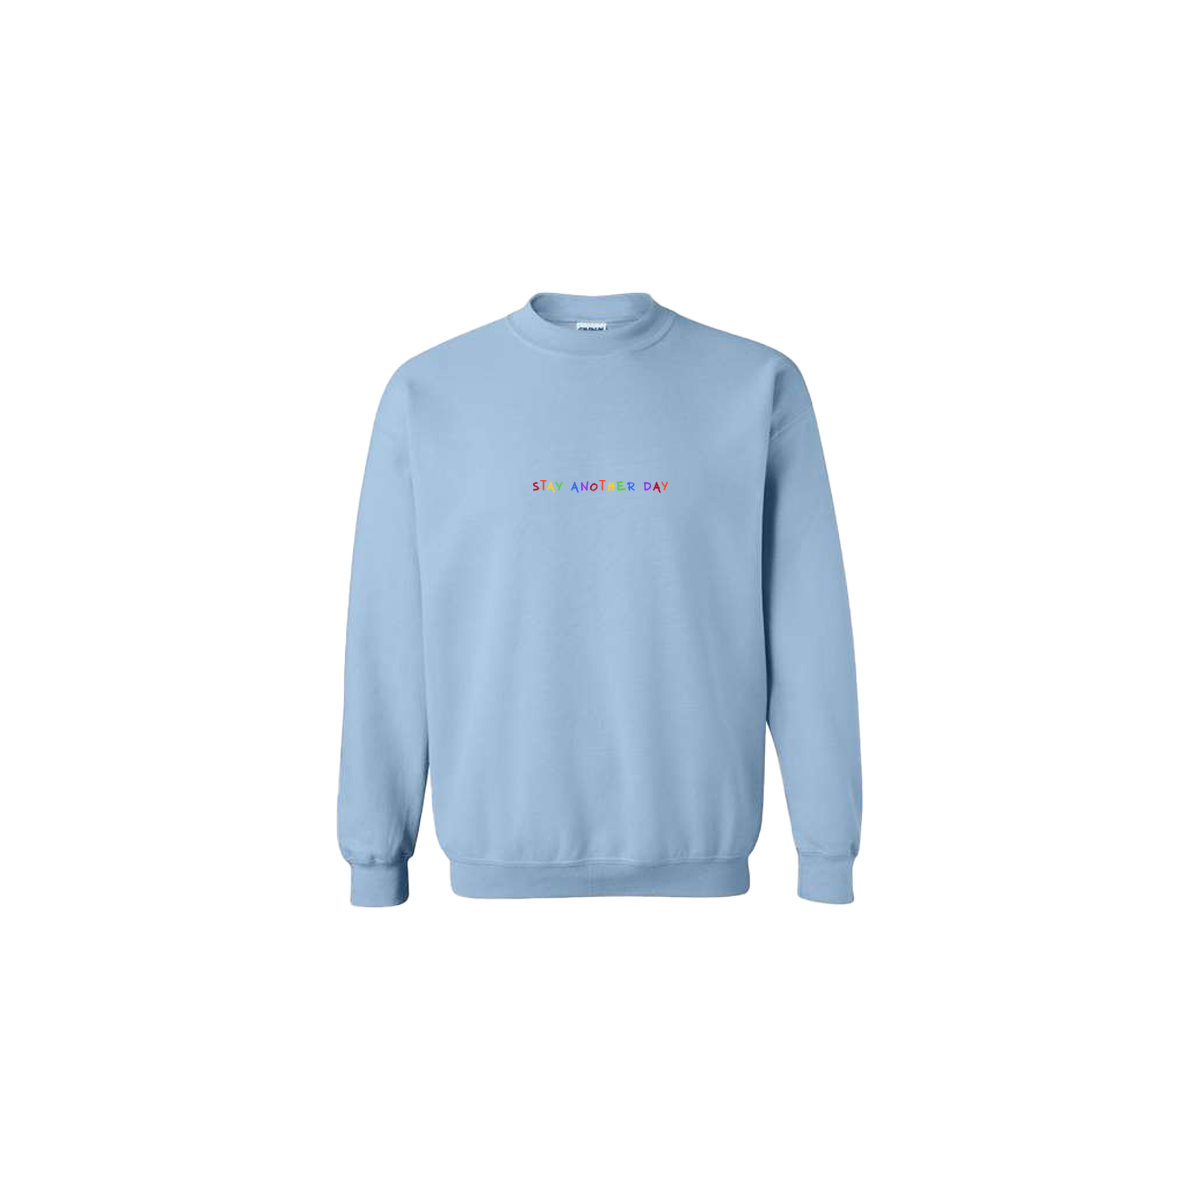 Stay Another Day Rainbow Embroidered Light Blue Crewneck - Mental Health Awareness Clothing